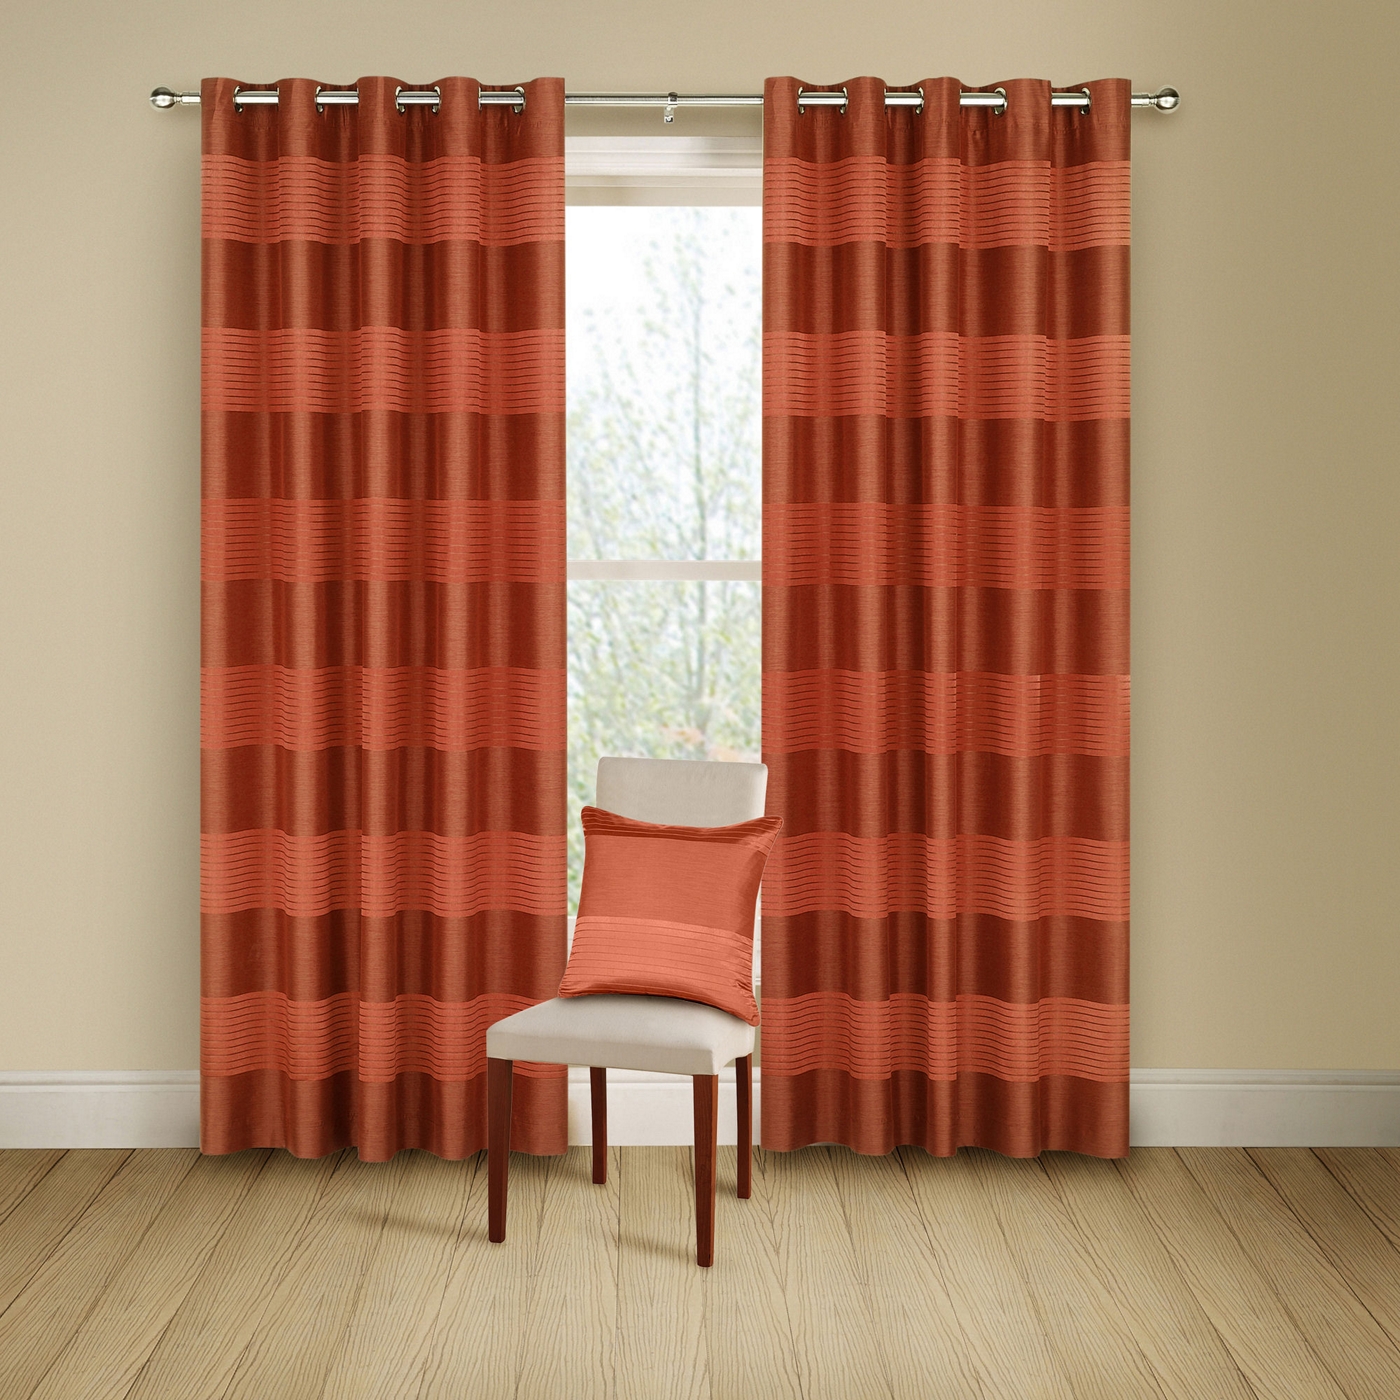 Montgomery Terracotta Arianna lined curtains with eyelet heading